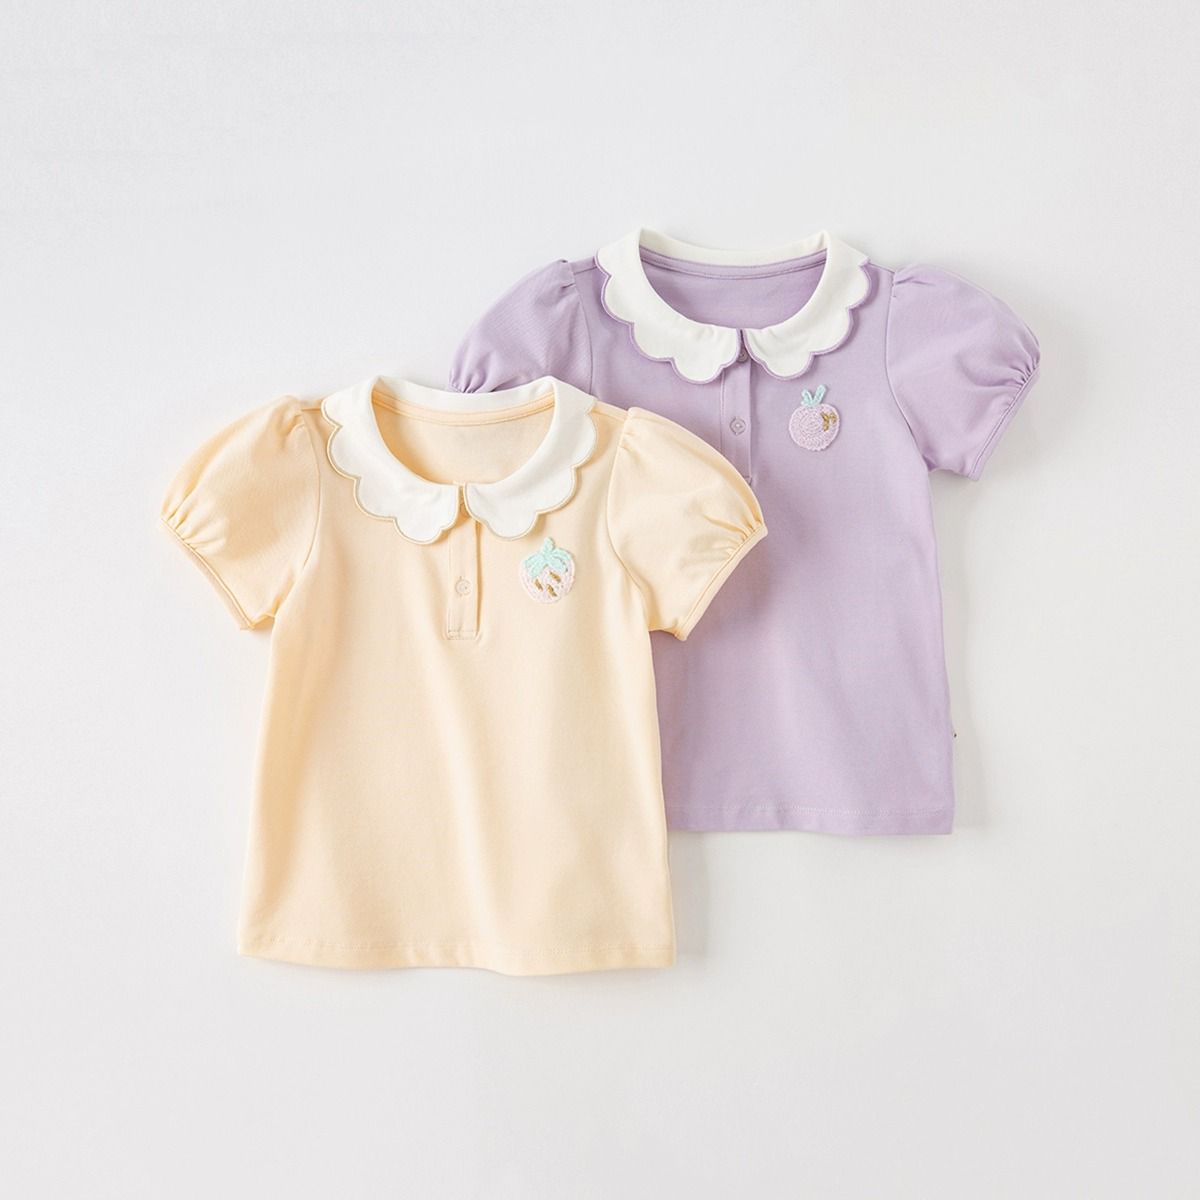 Children's T-shirt 2023 summer new style girls POLO shirt for small and medium-sized children baby doll collar fashionable thin top 1-3 years old